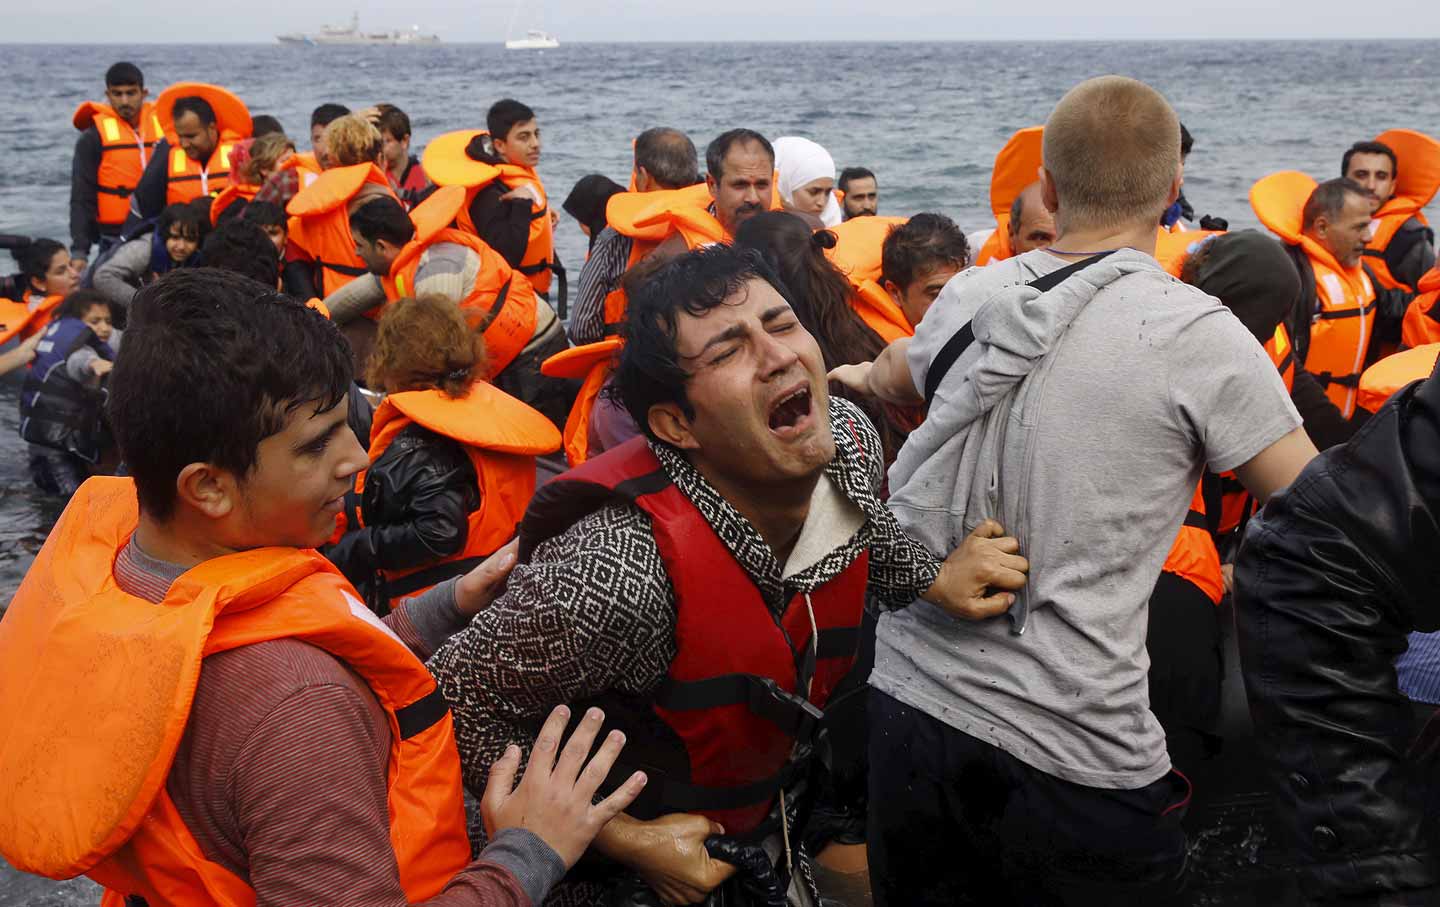 Meet the Heroic Greeks Rescuing the Refugees the EU Has Abandoned